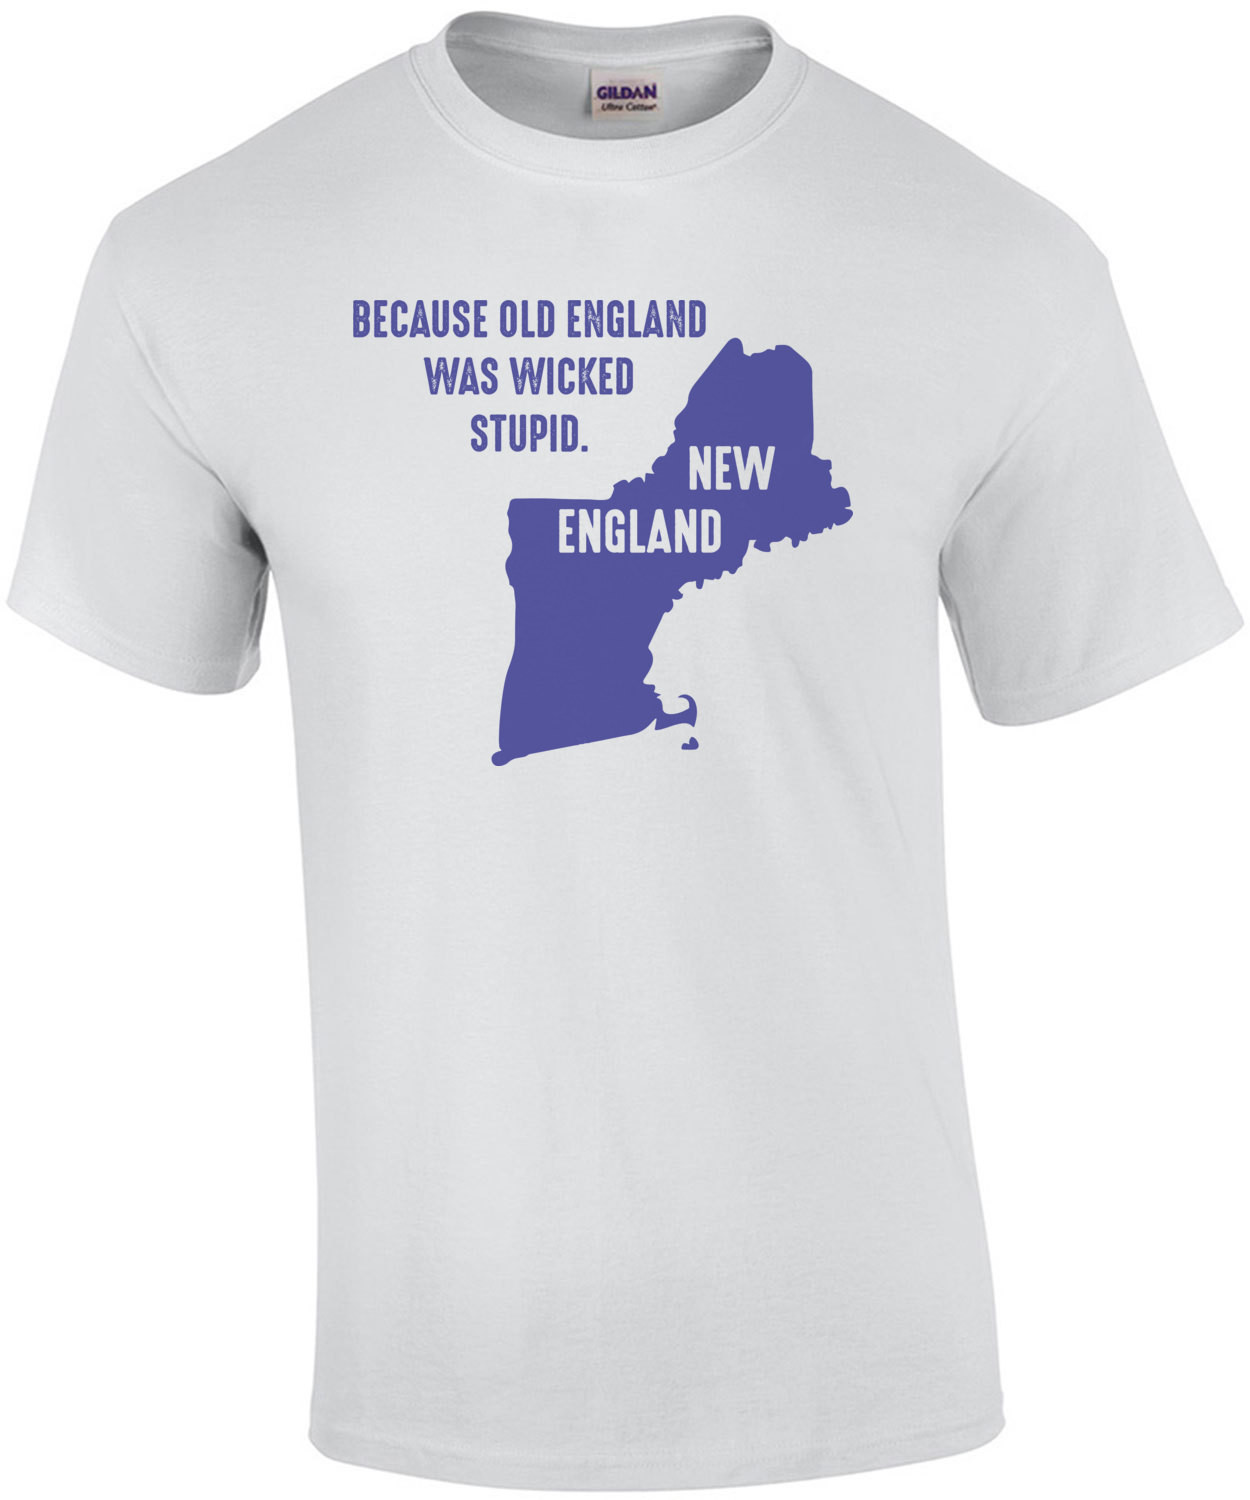 Because old England was wicked stupid. New England.  Maine, Vermont, New Hampshire, Massachusetts, Rhode Island, and Connecticut - New England T-Shirt